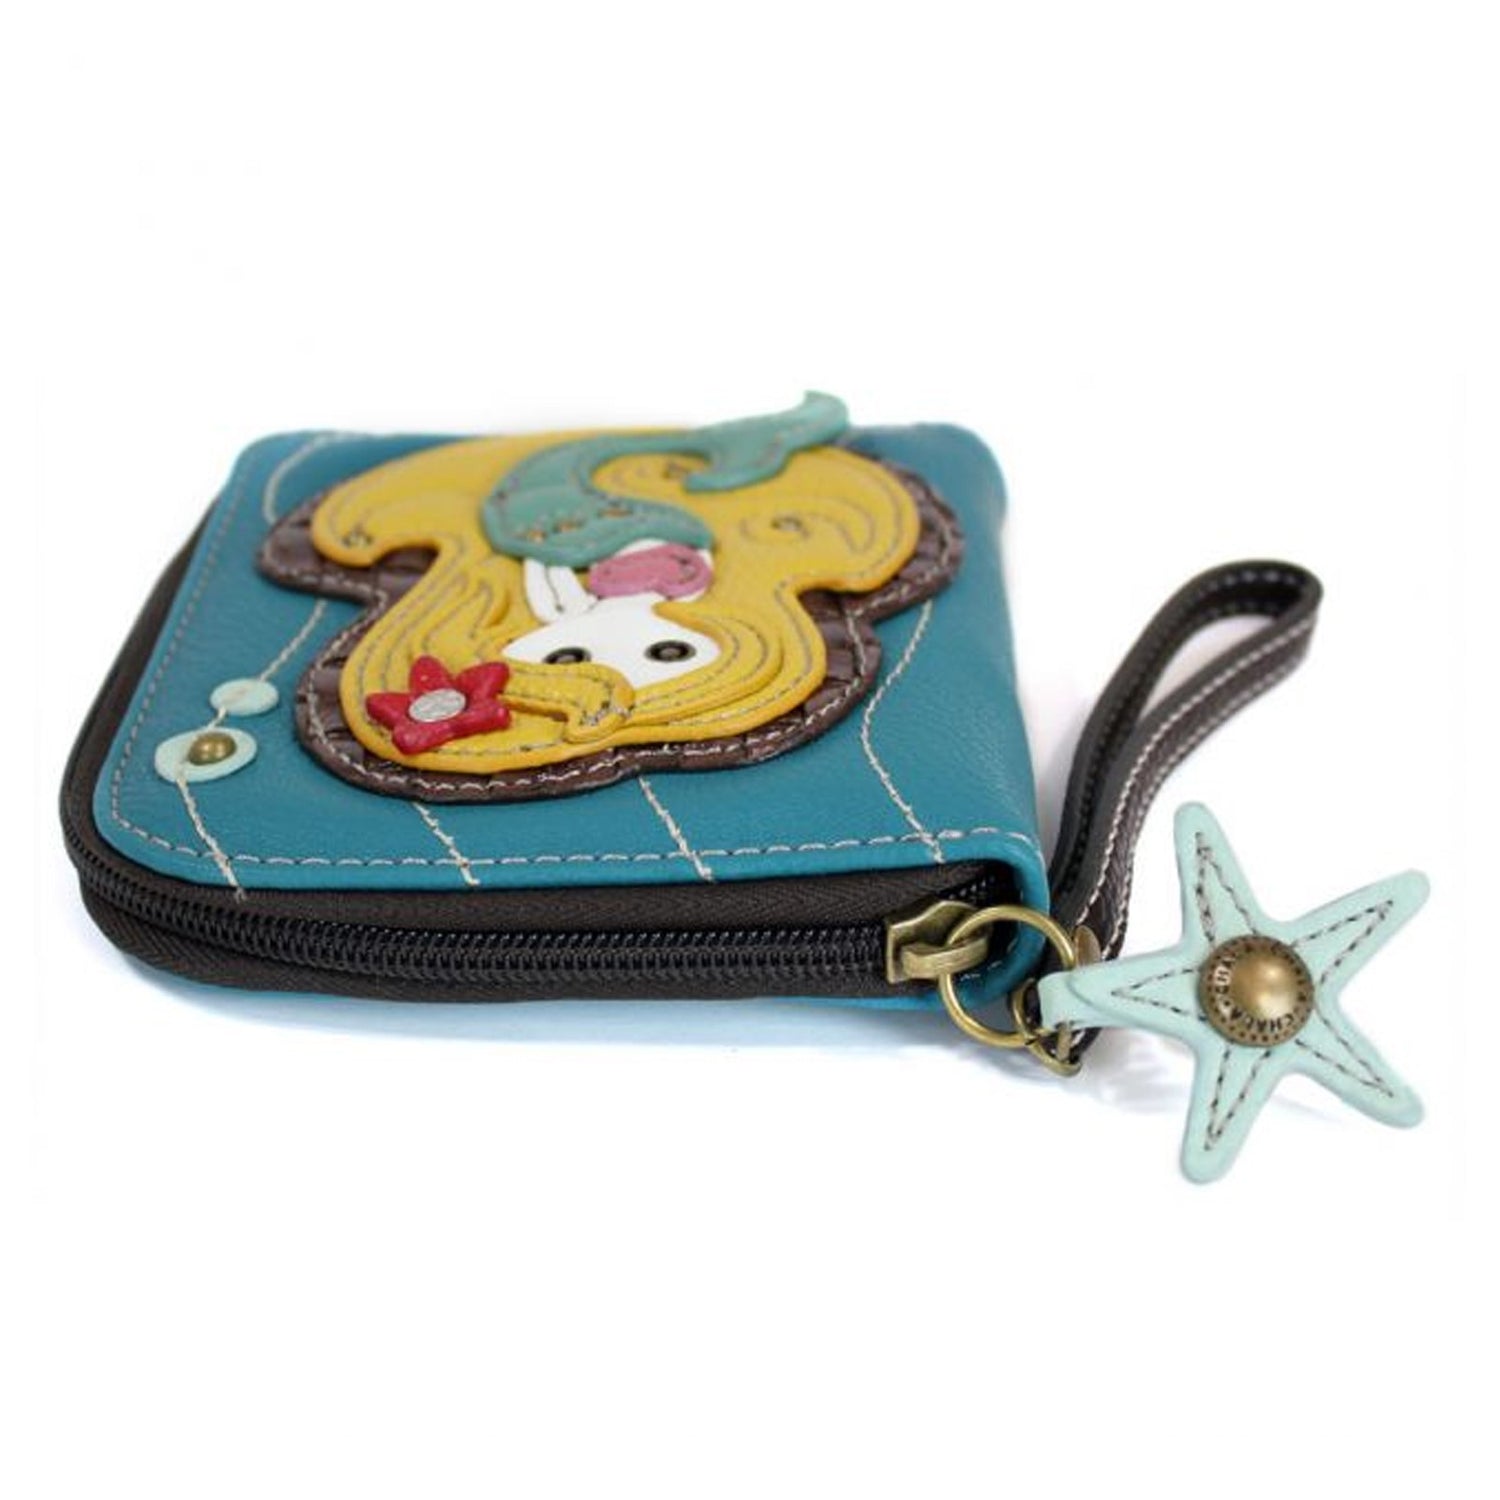 MyEA round coin purse with zip